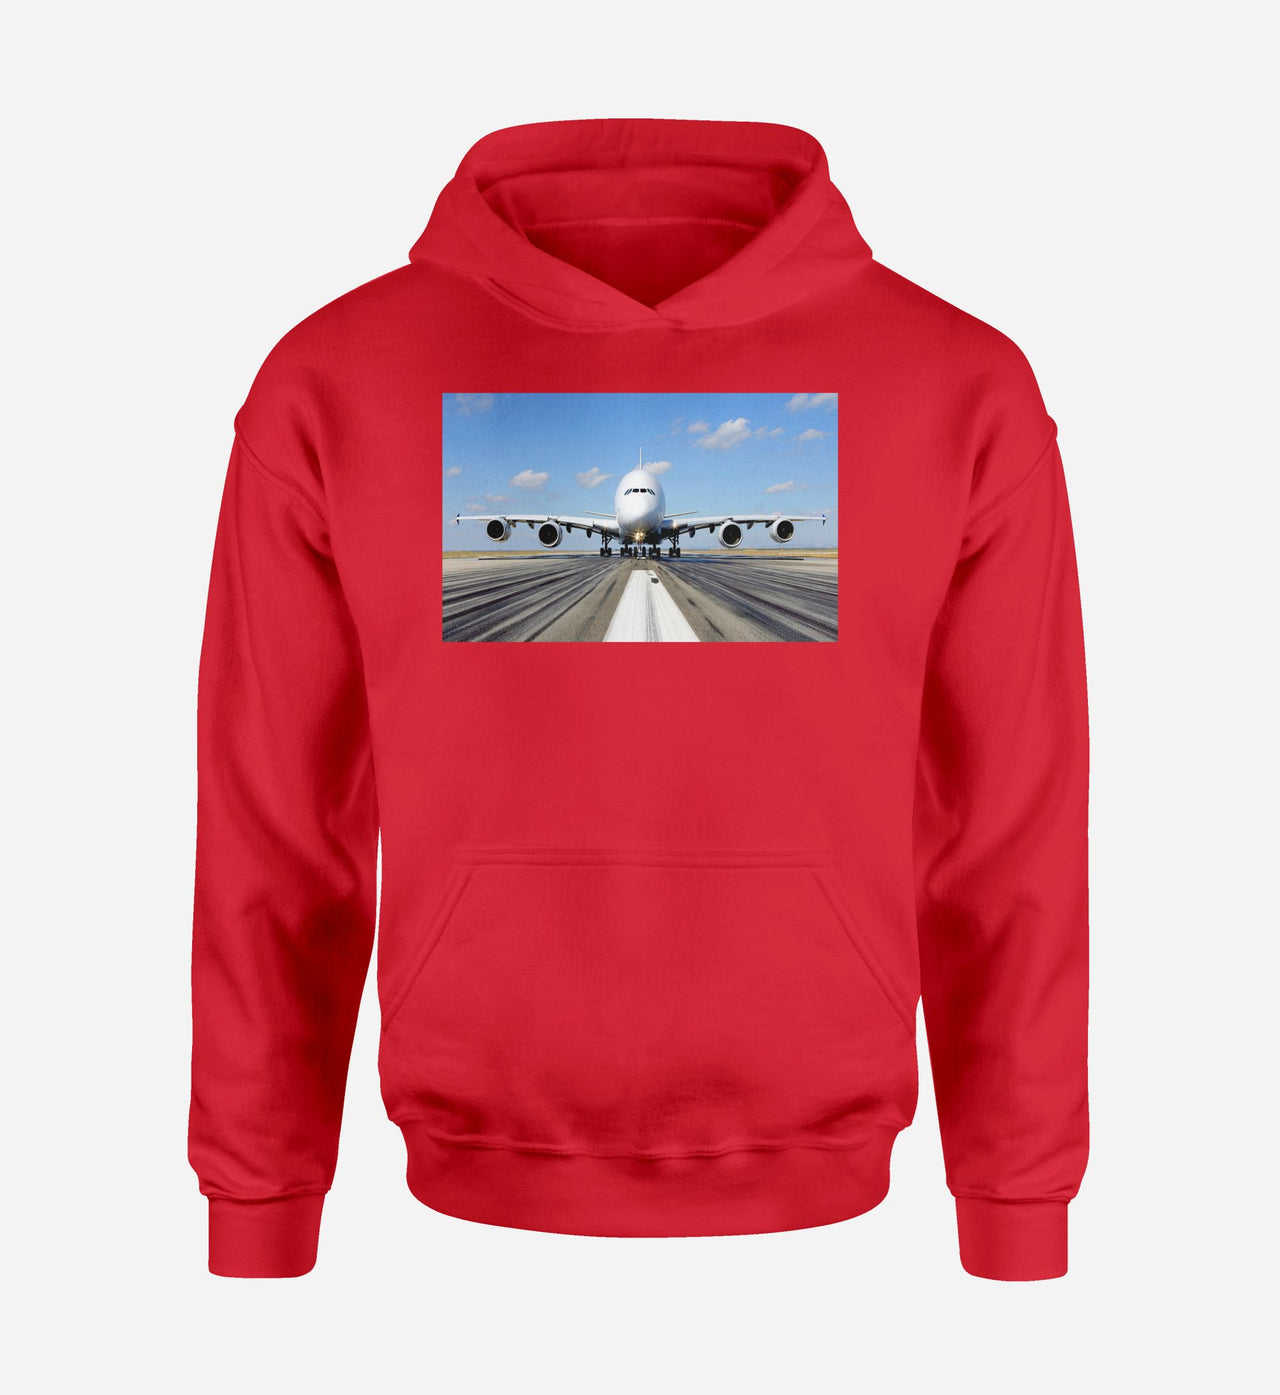 Mighty Airbus A380 Designed Hoodies